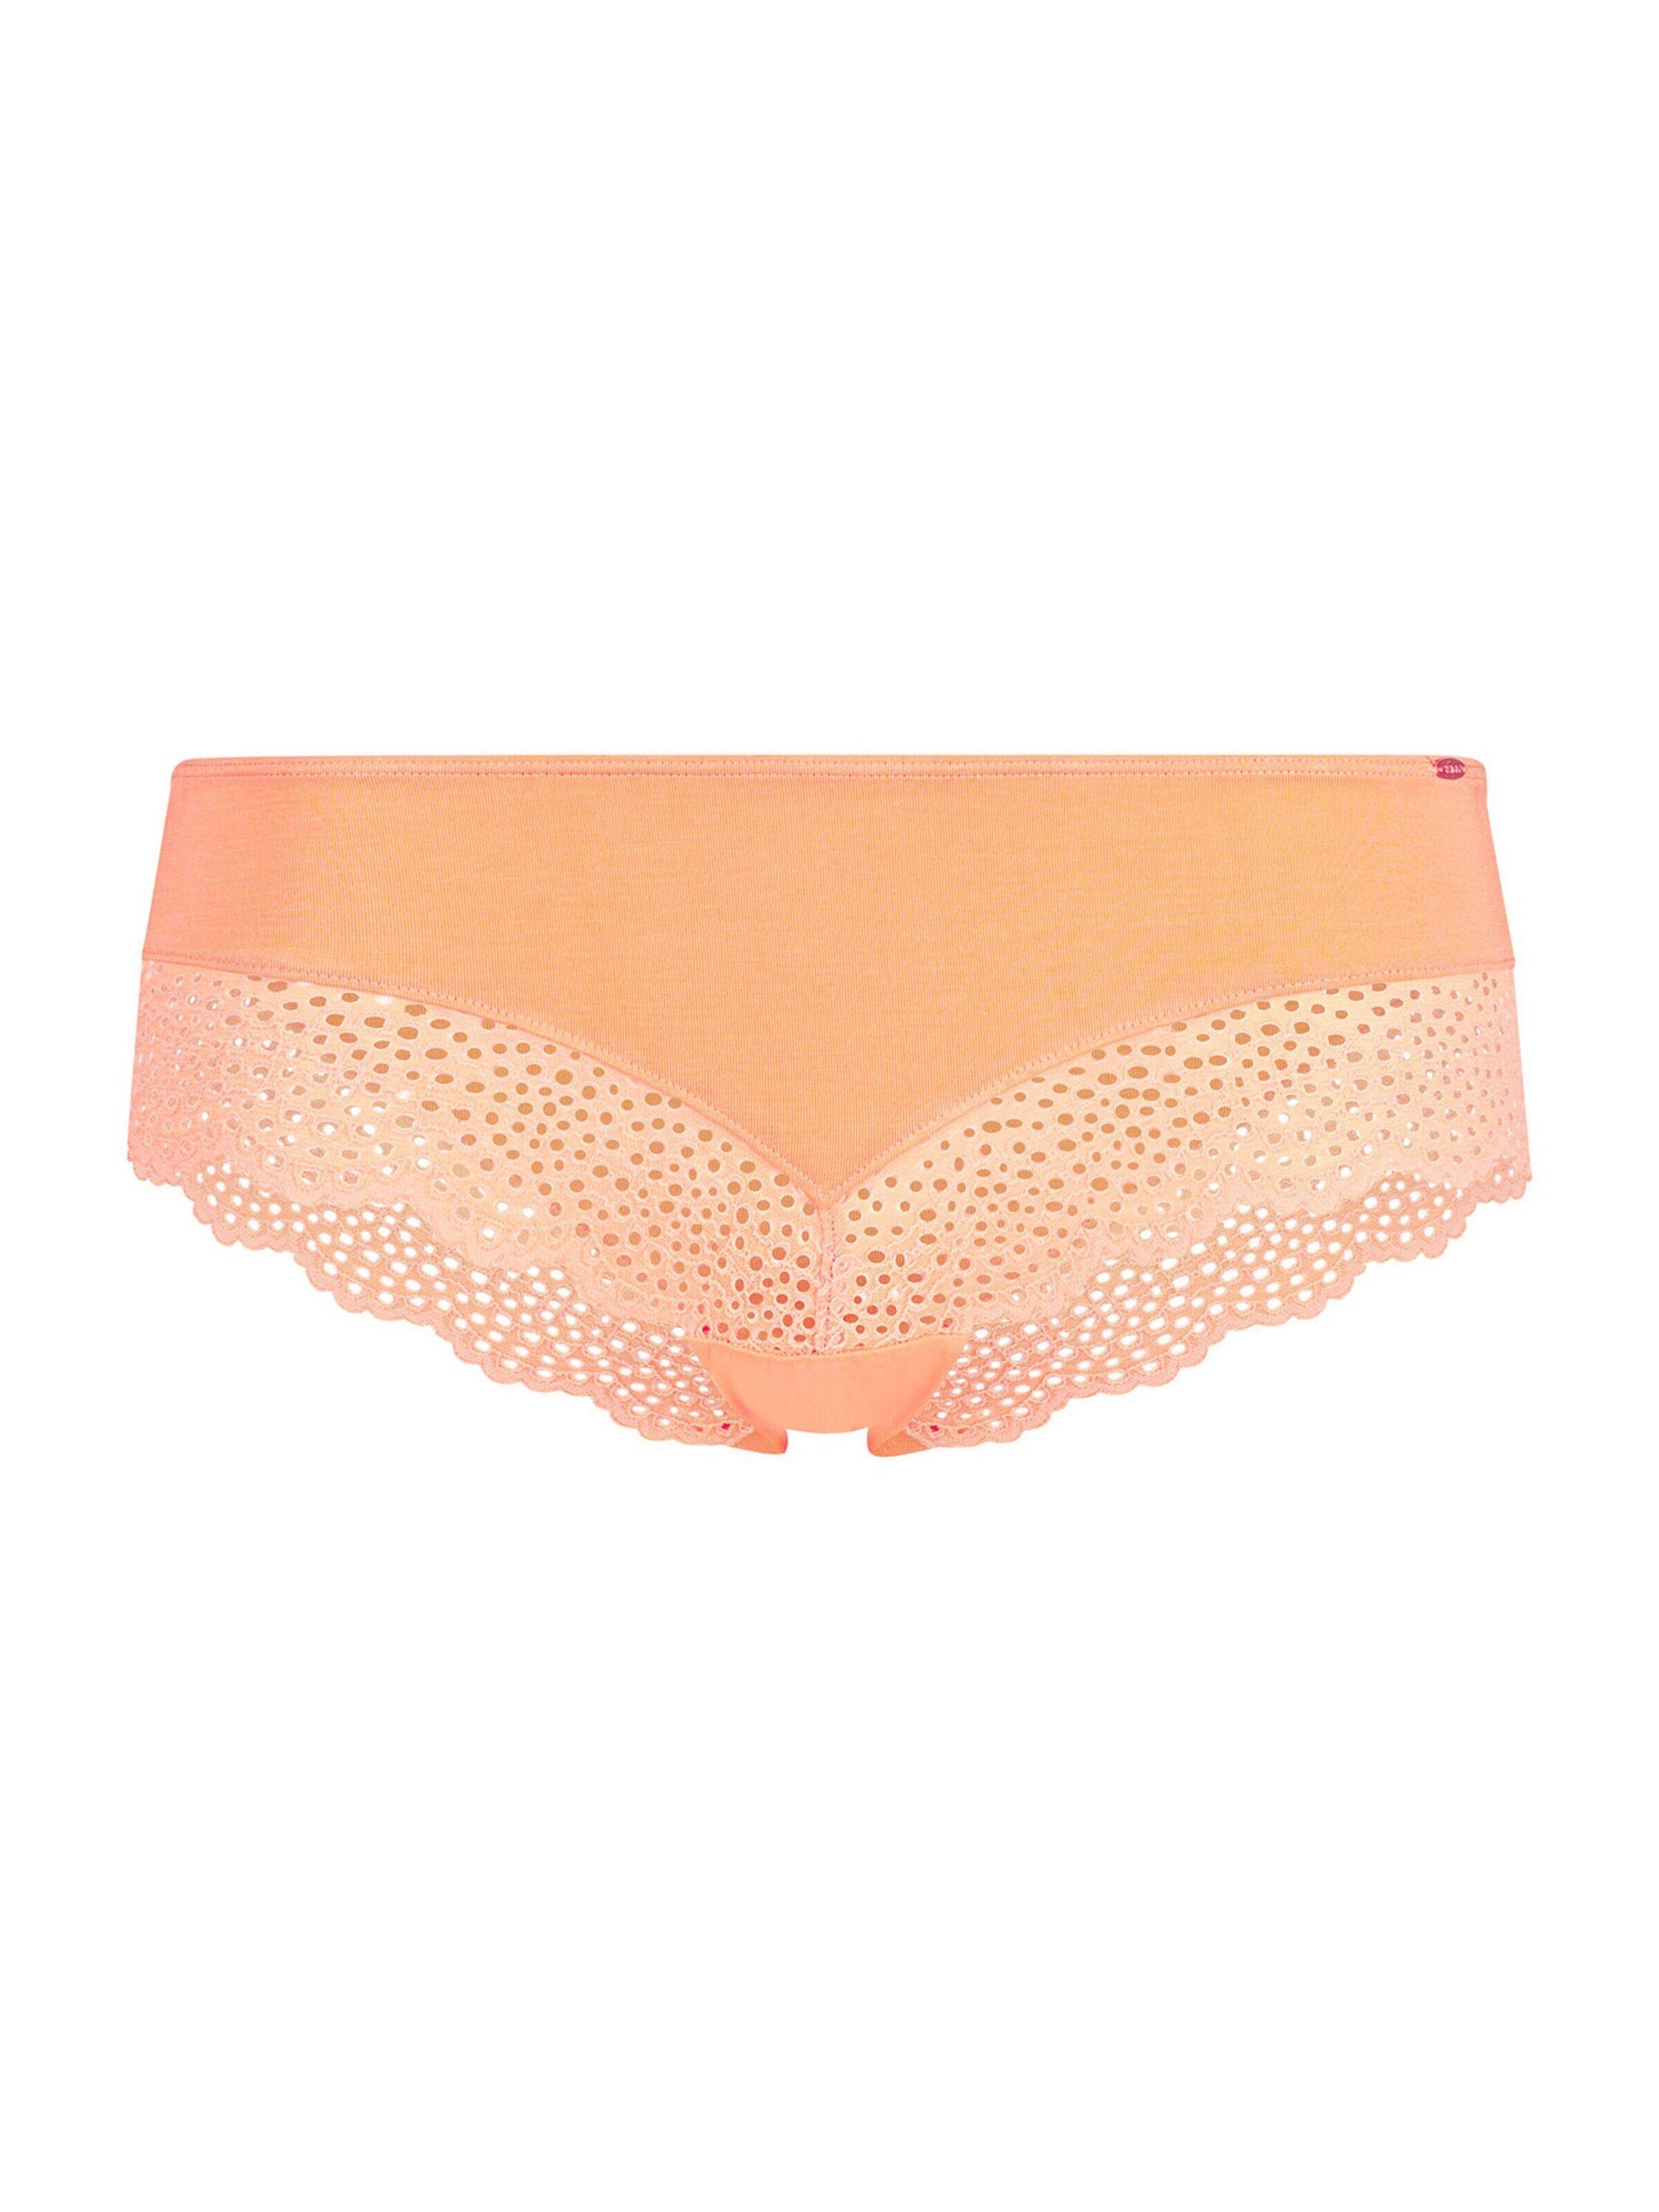 Skiny Panty »Every Day« (1-St), Label Plate online kaufen | OTTO